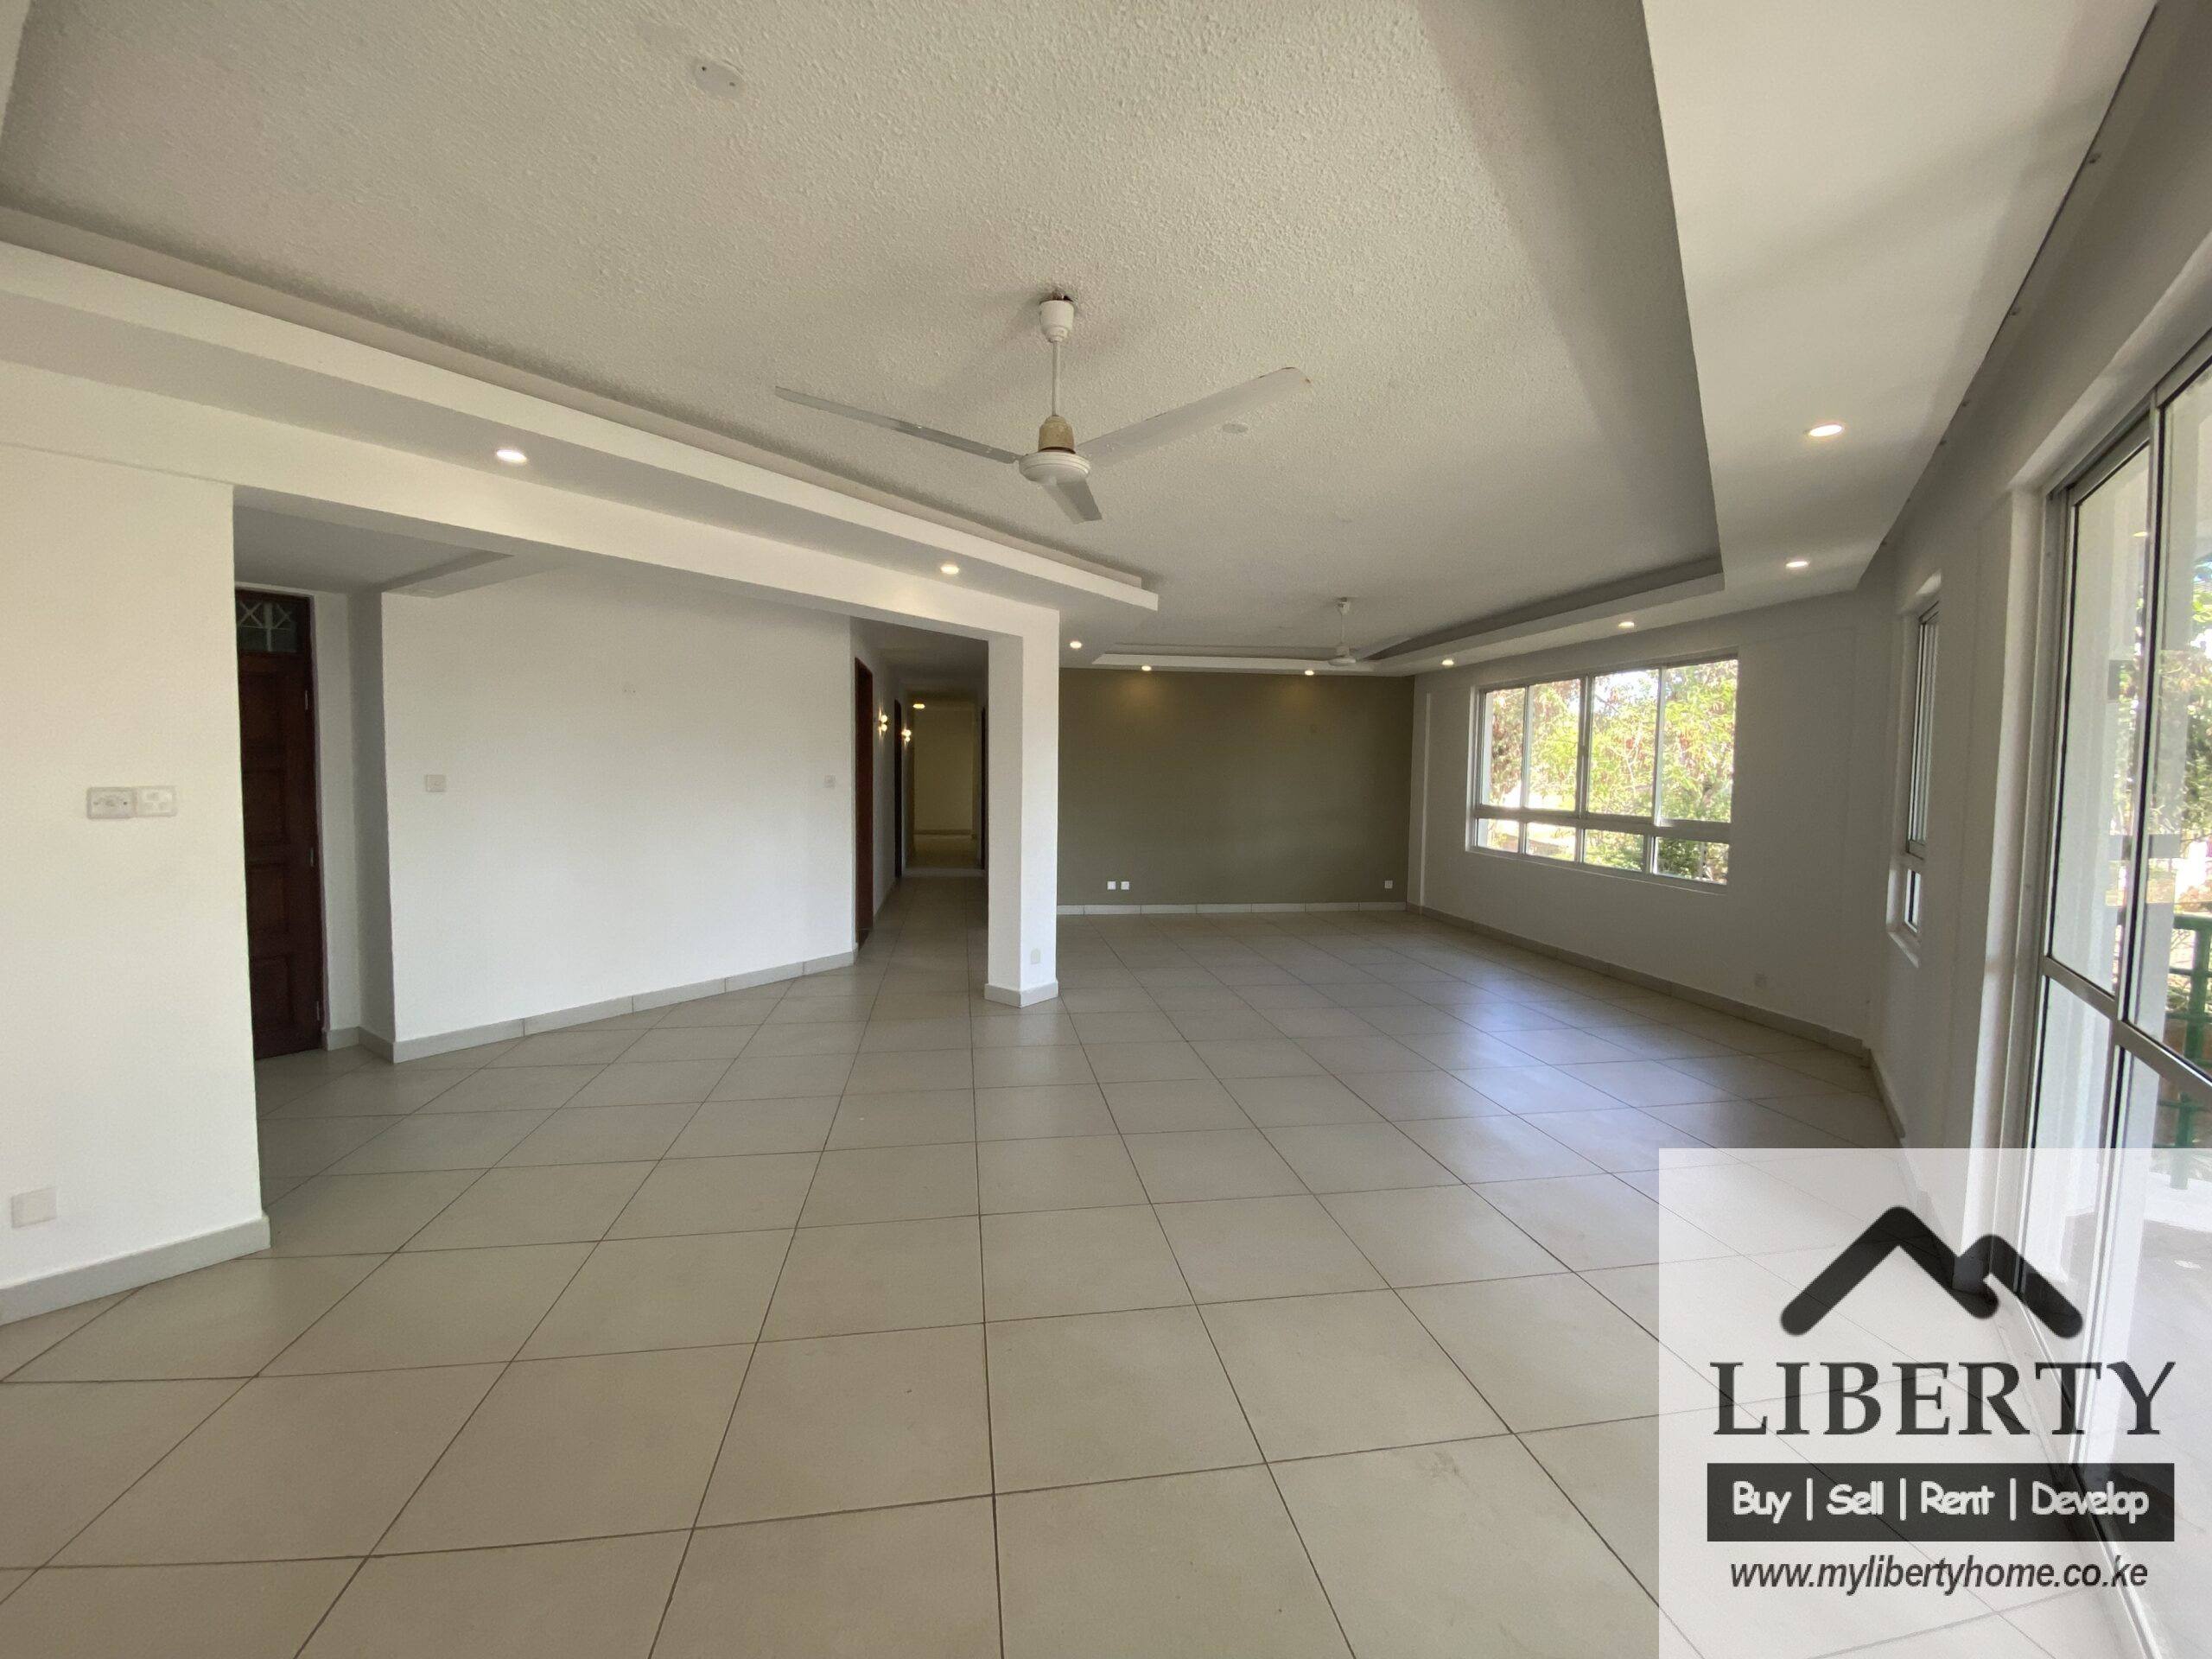 Newly Renovated Modern 4 Bedroom Apartment In Mombasa-Nyali For Sale-25M- Ref-768